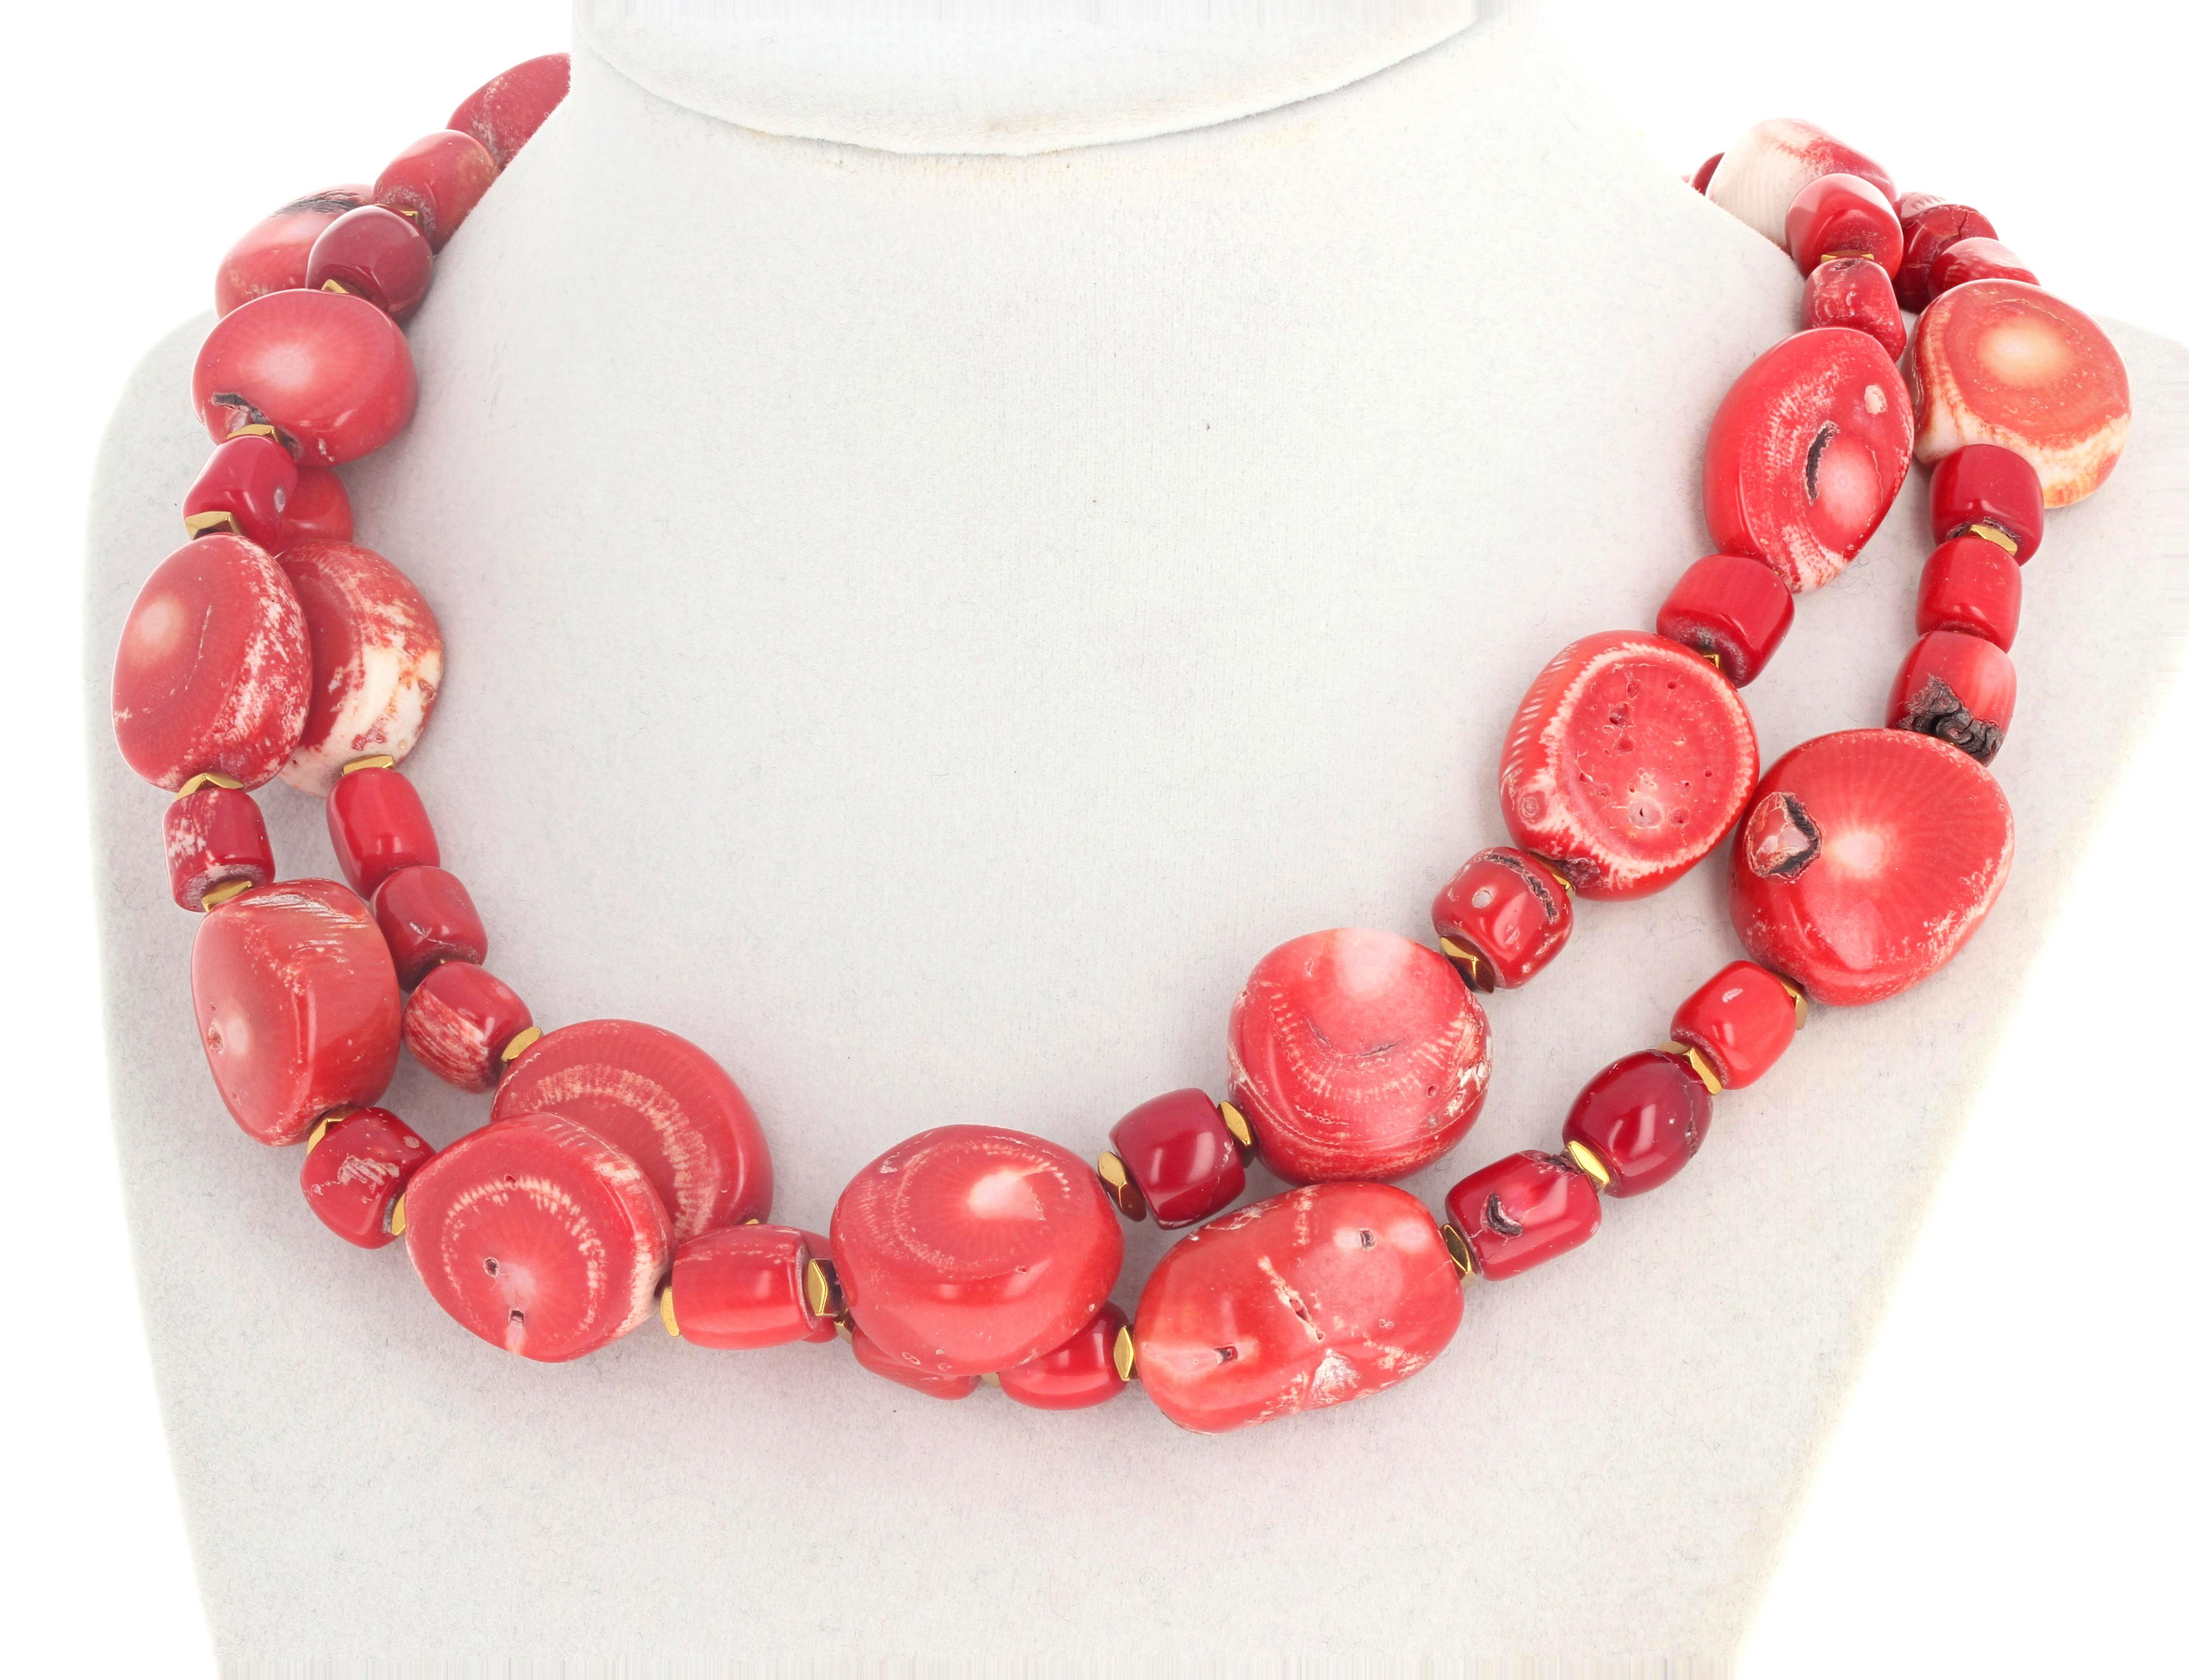 These real very red natural Bamboo Coral in this 17 1/2 inch long necklace are enhanced with glowing gold plated gemcut rondel spacers.  The larger Coral are approximately 24mm x 18mm.  The gold plated clasp is an easy to use slide-in clasp.  